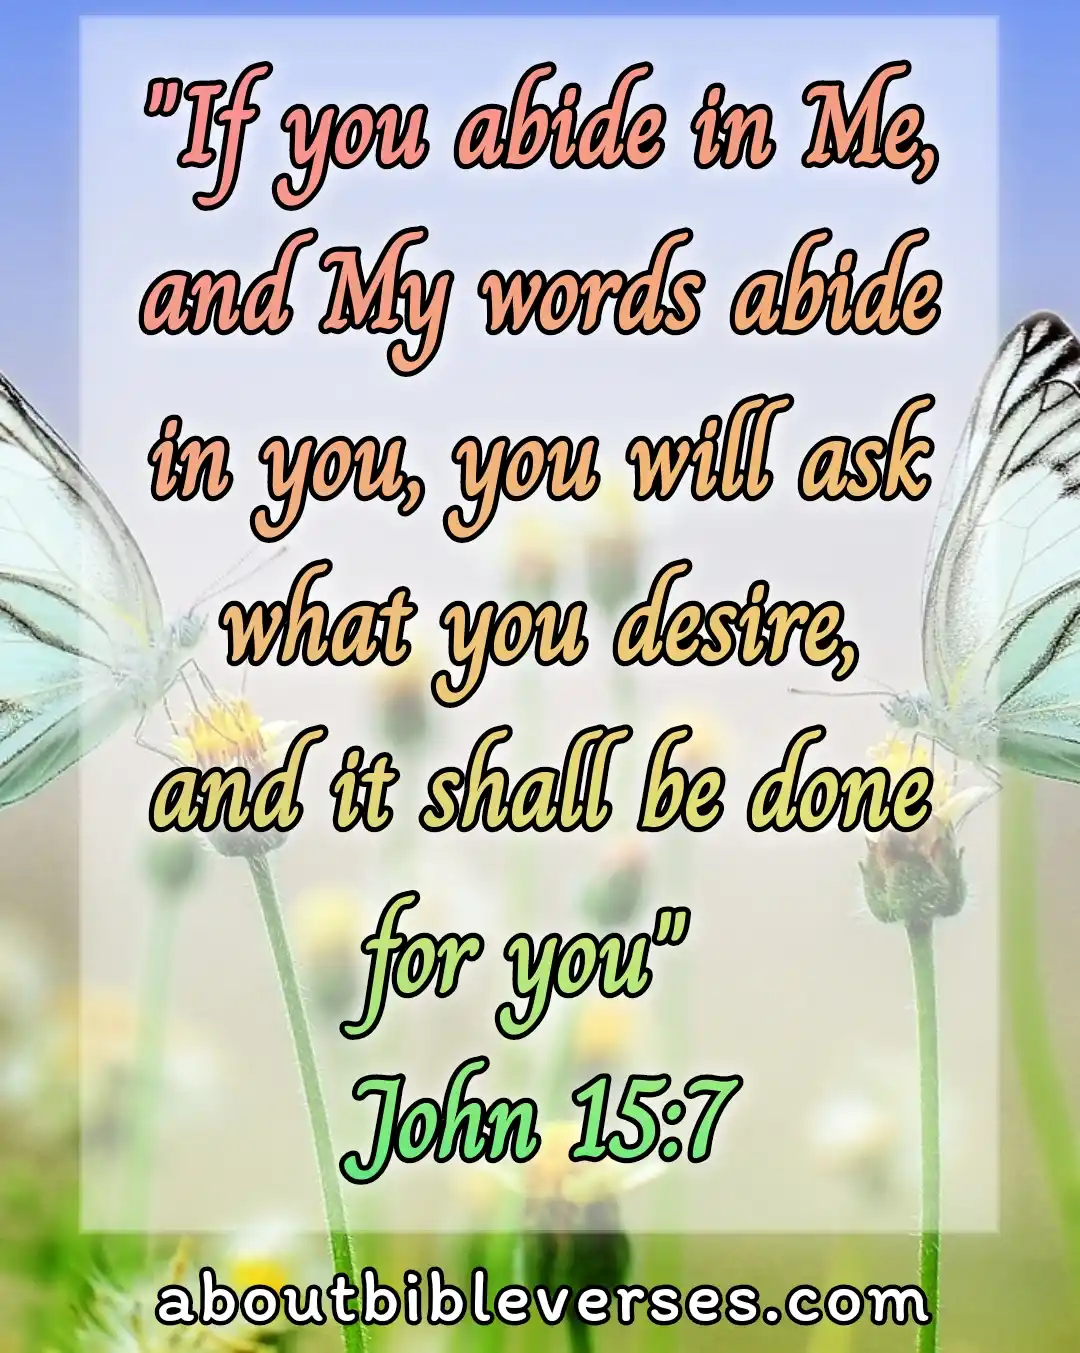 Bible Verses About Asking God For Help (John 15:7)